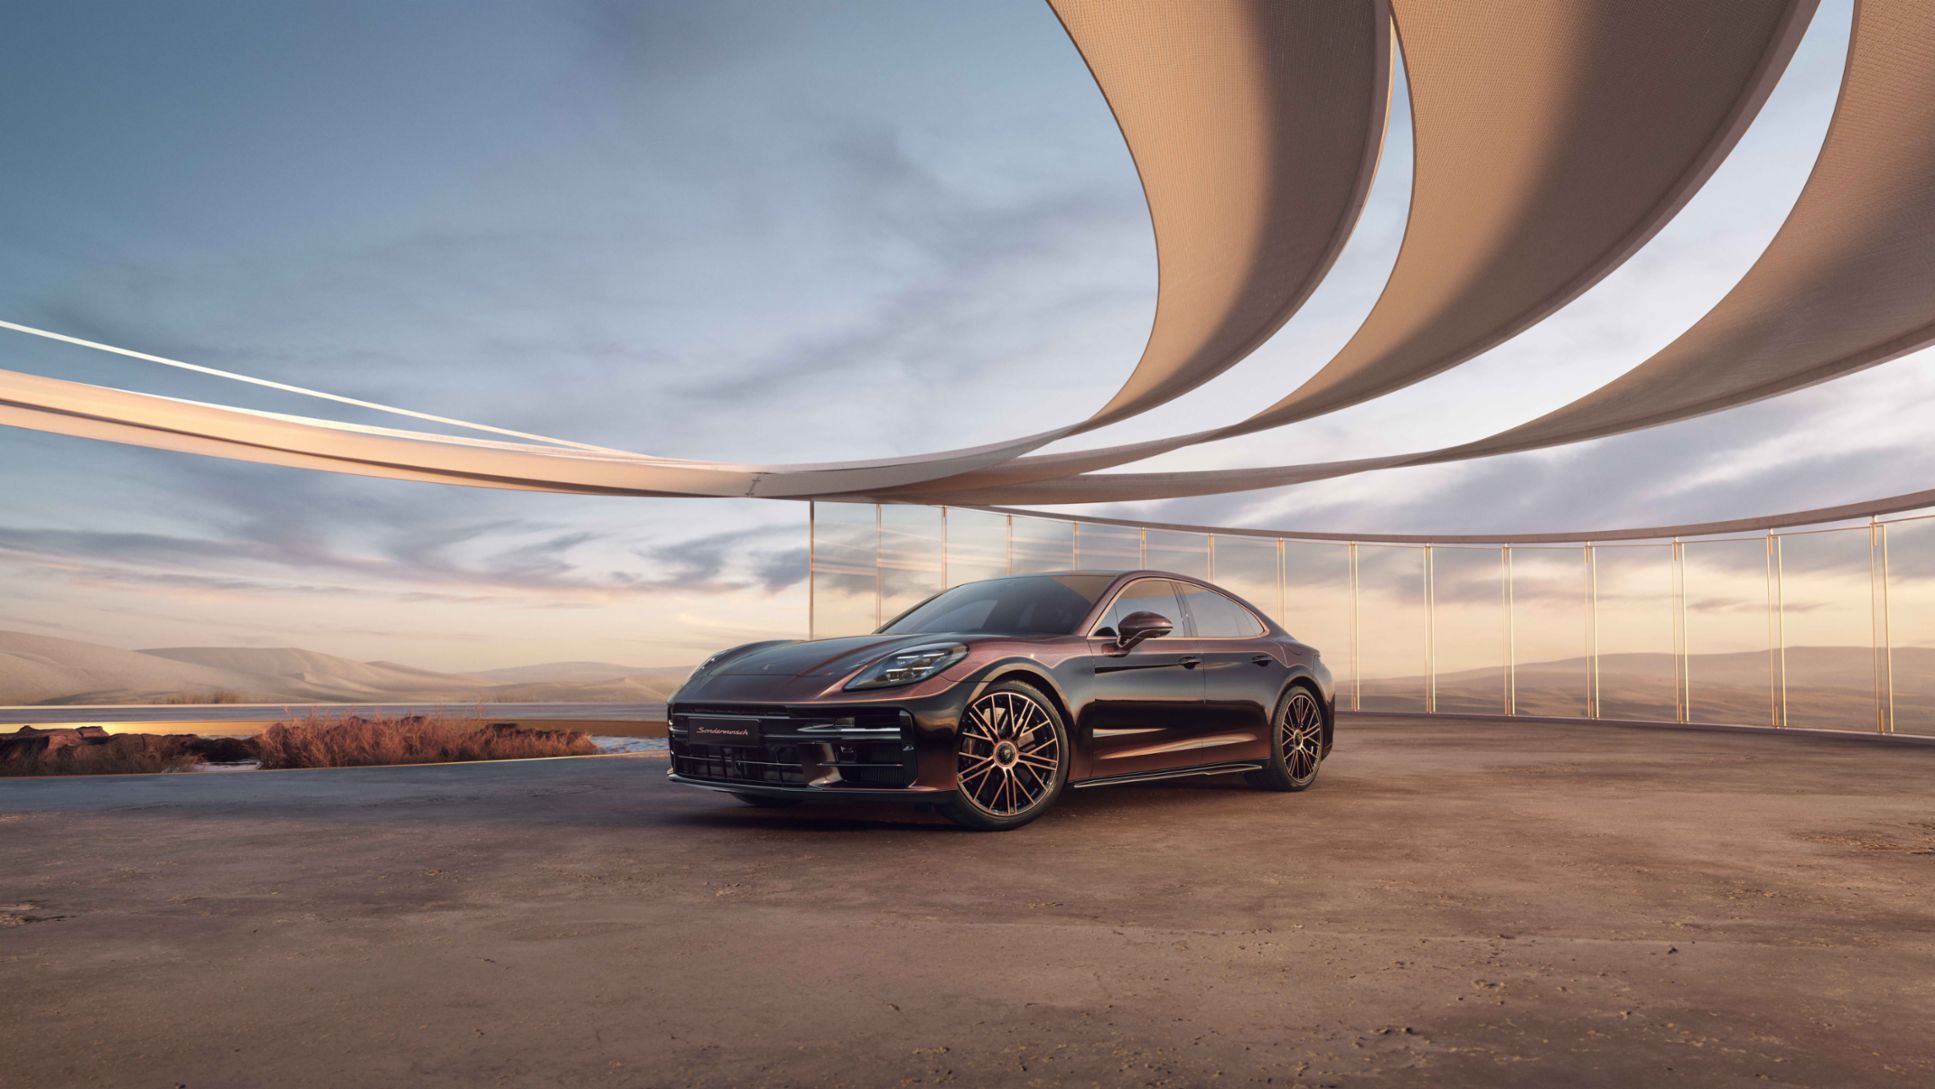 More digital, more luxurious, more efficient: the new Panamera